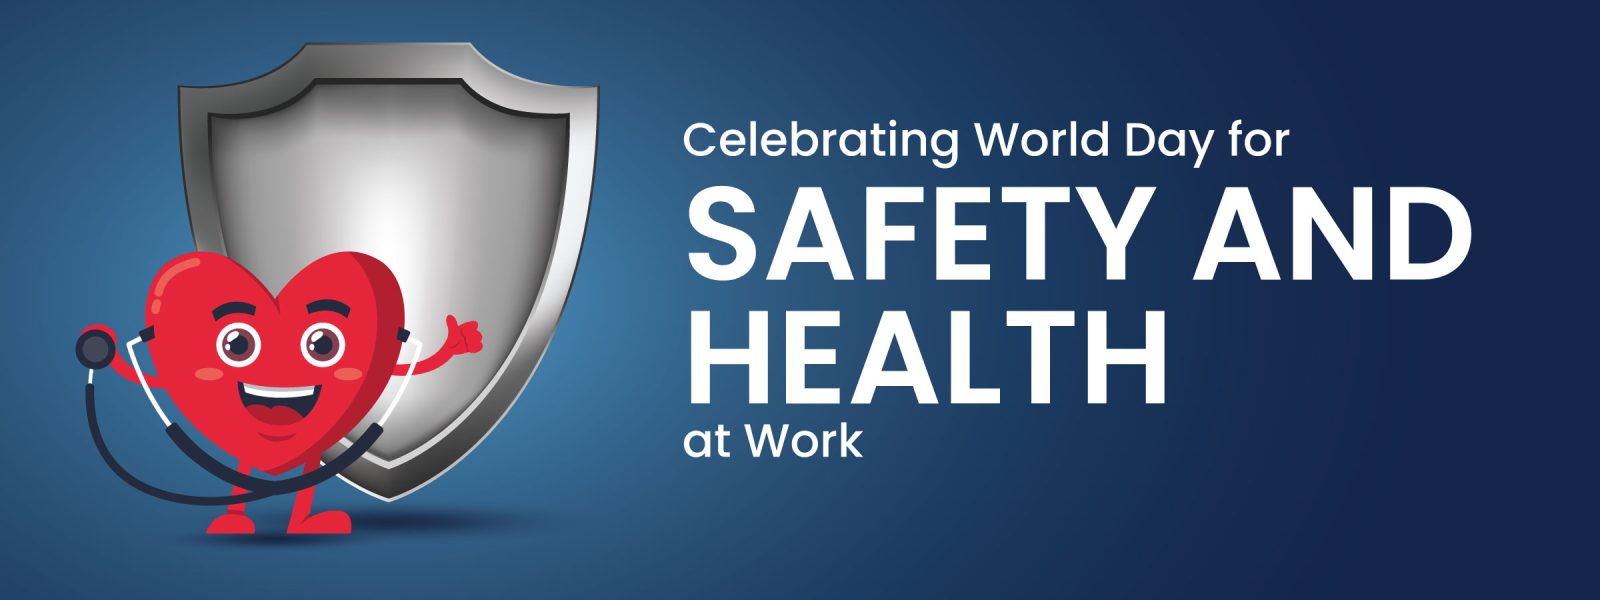 World day for health and safety at work